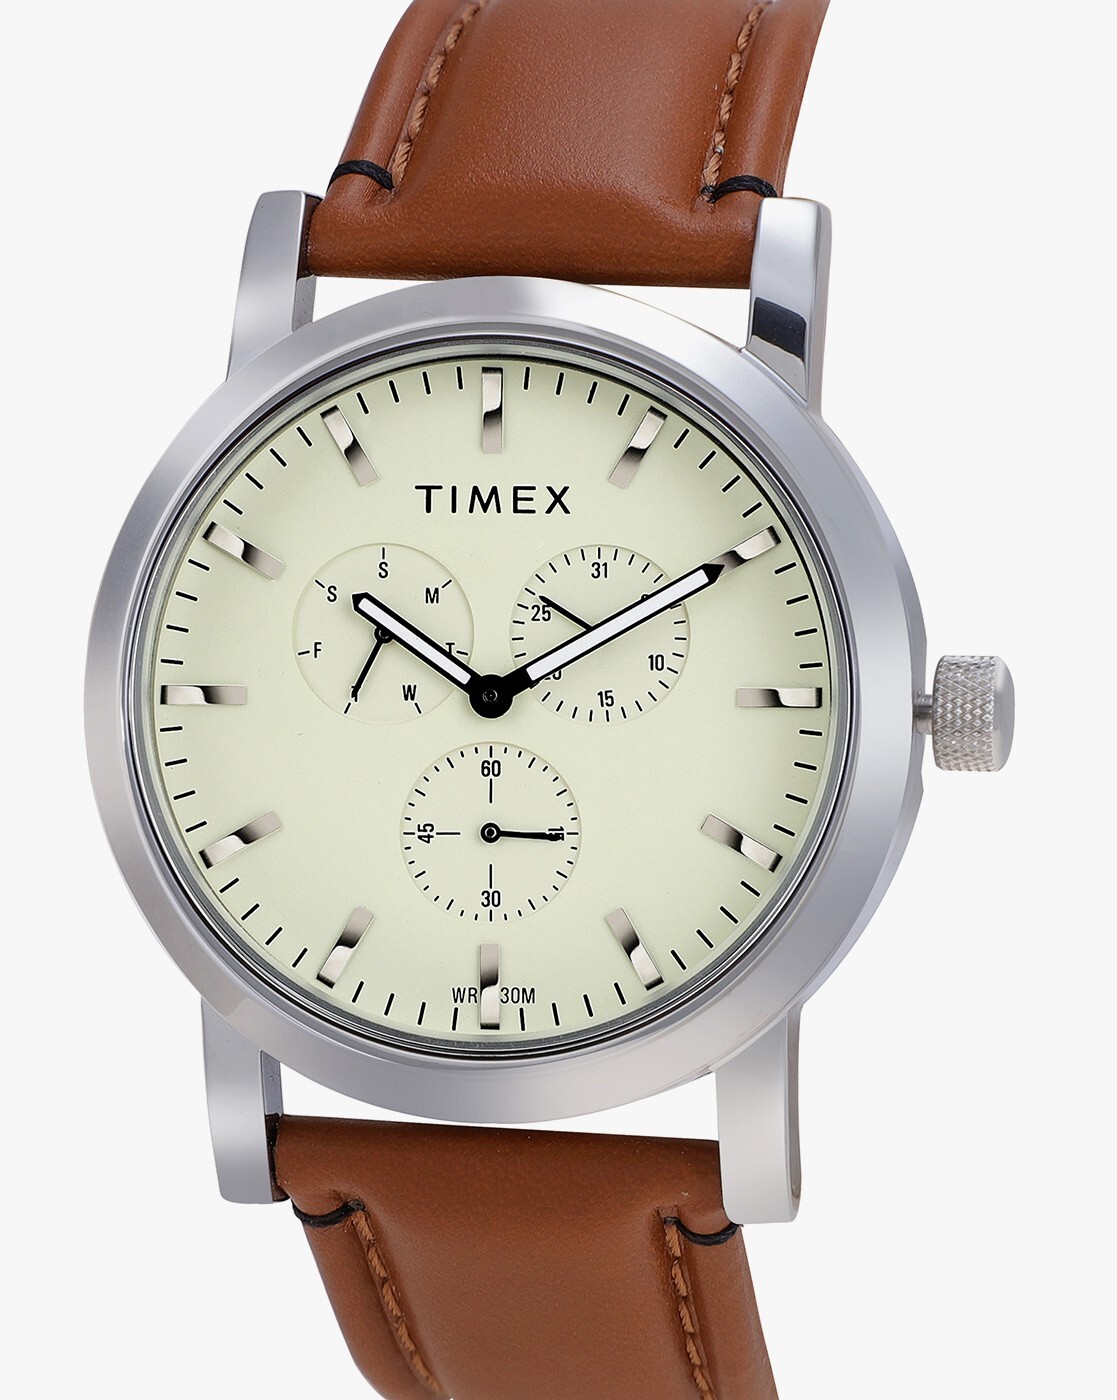 Experience more than 116 timex watches latest